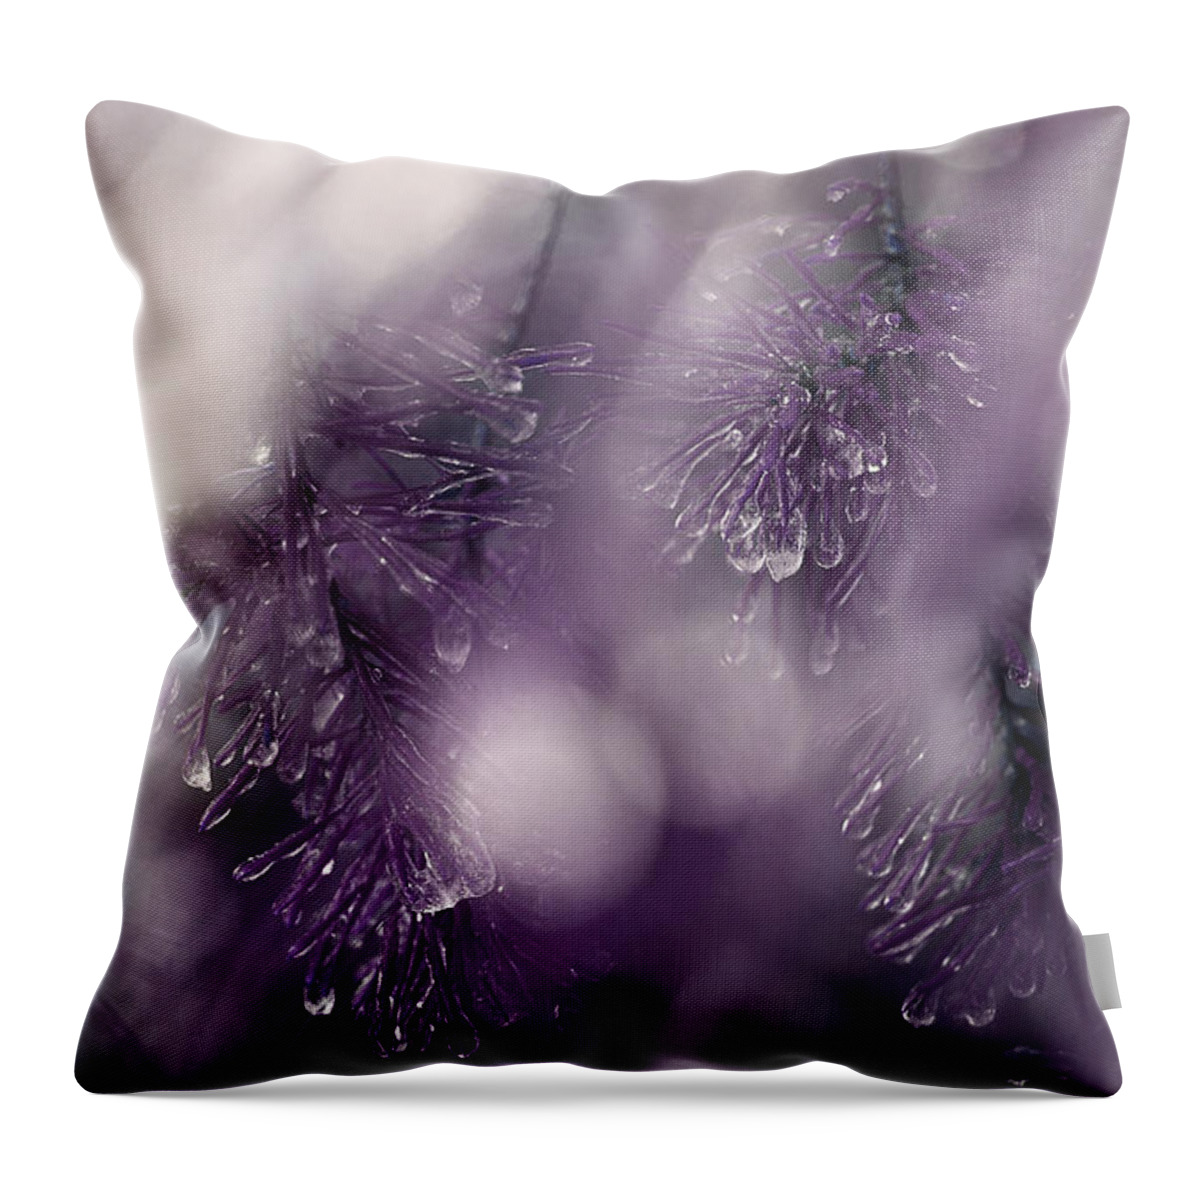 Pine Needles Throw Pillow featuring the photograph I Still Search For You by Michael Eingle